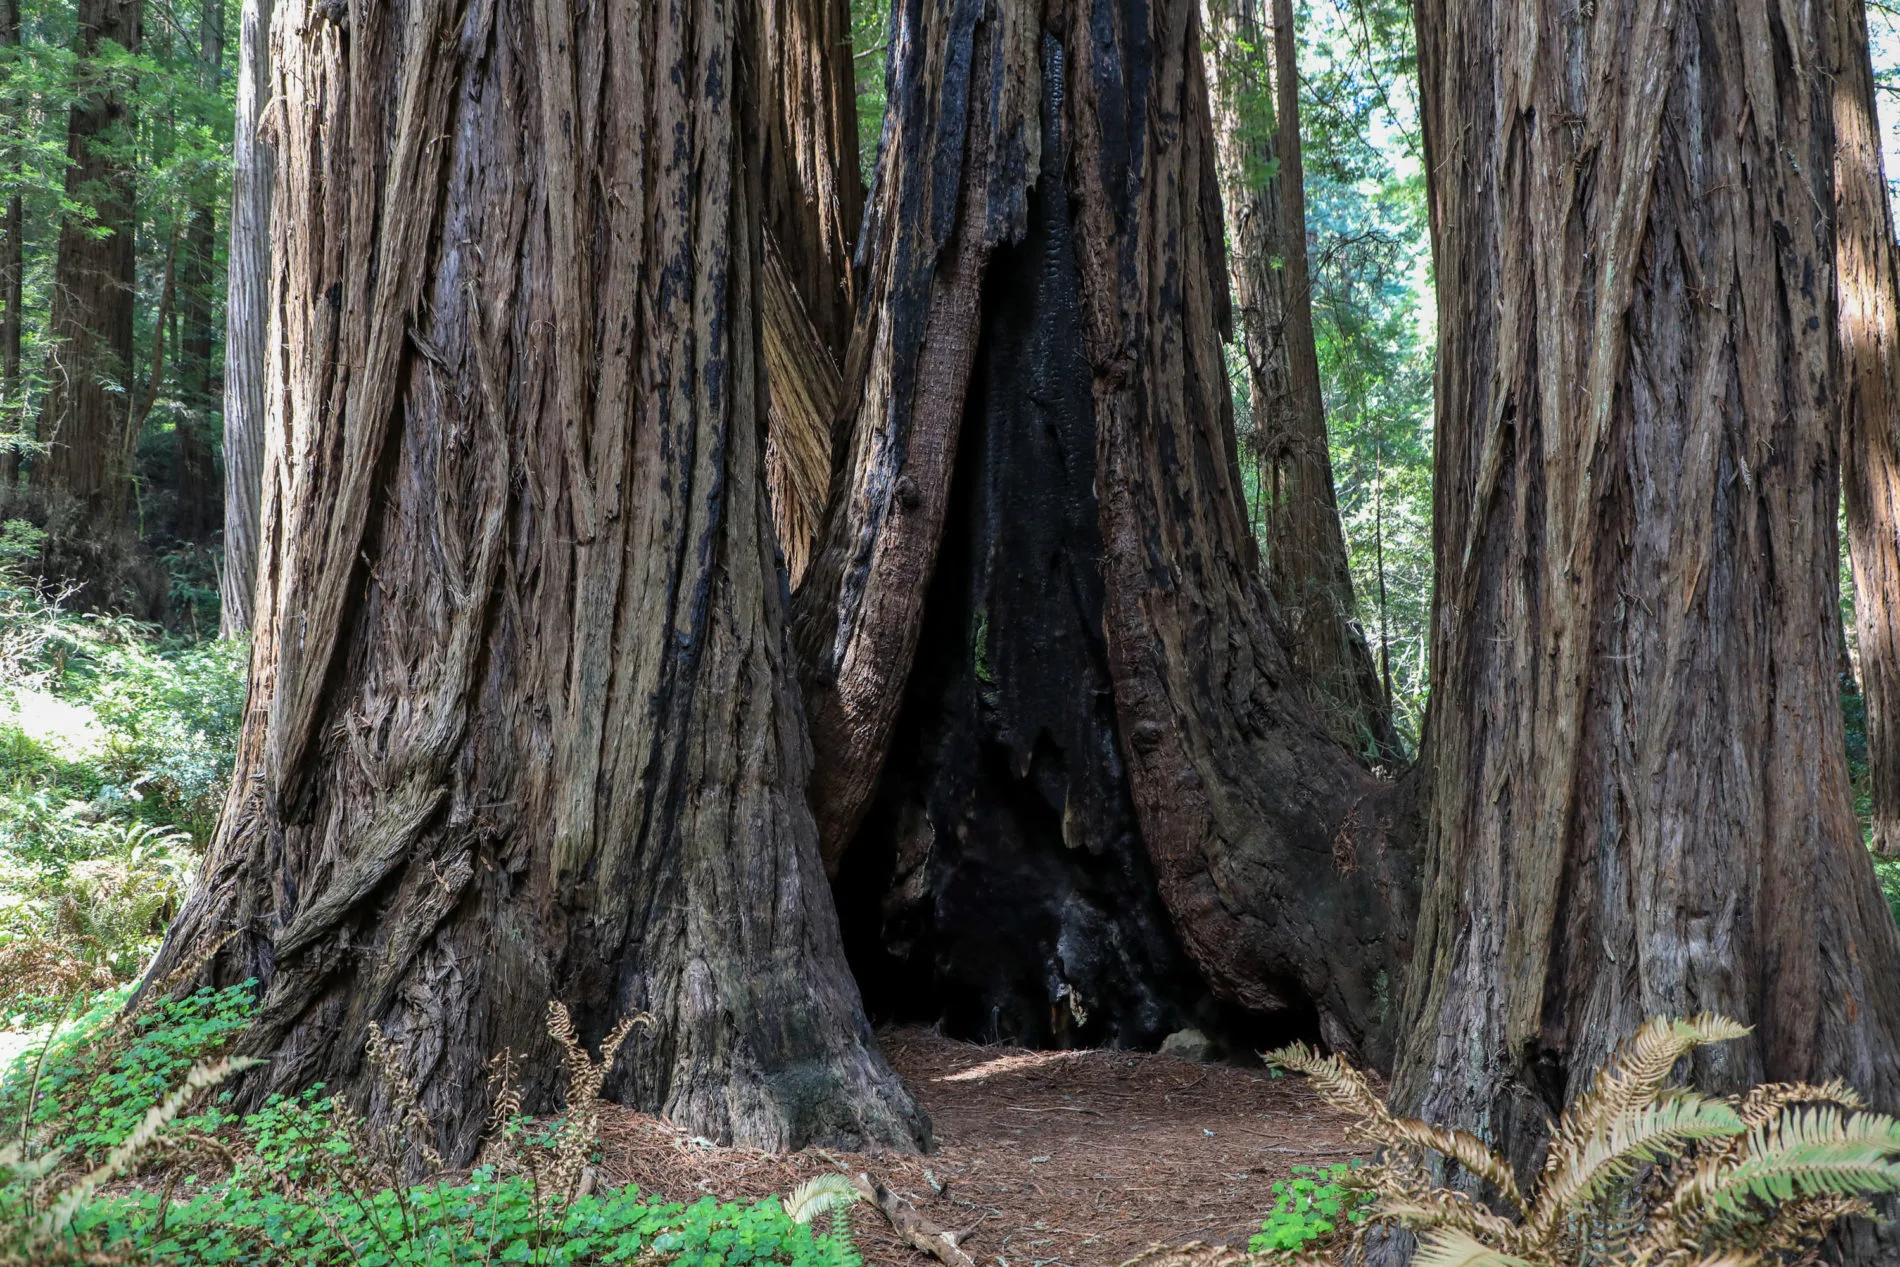 A cluster of old-growth redwood trees. They tend to grow in clusters called family circles.